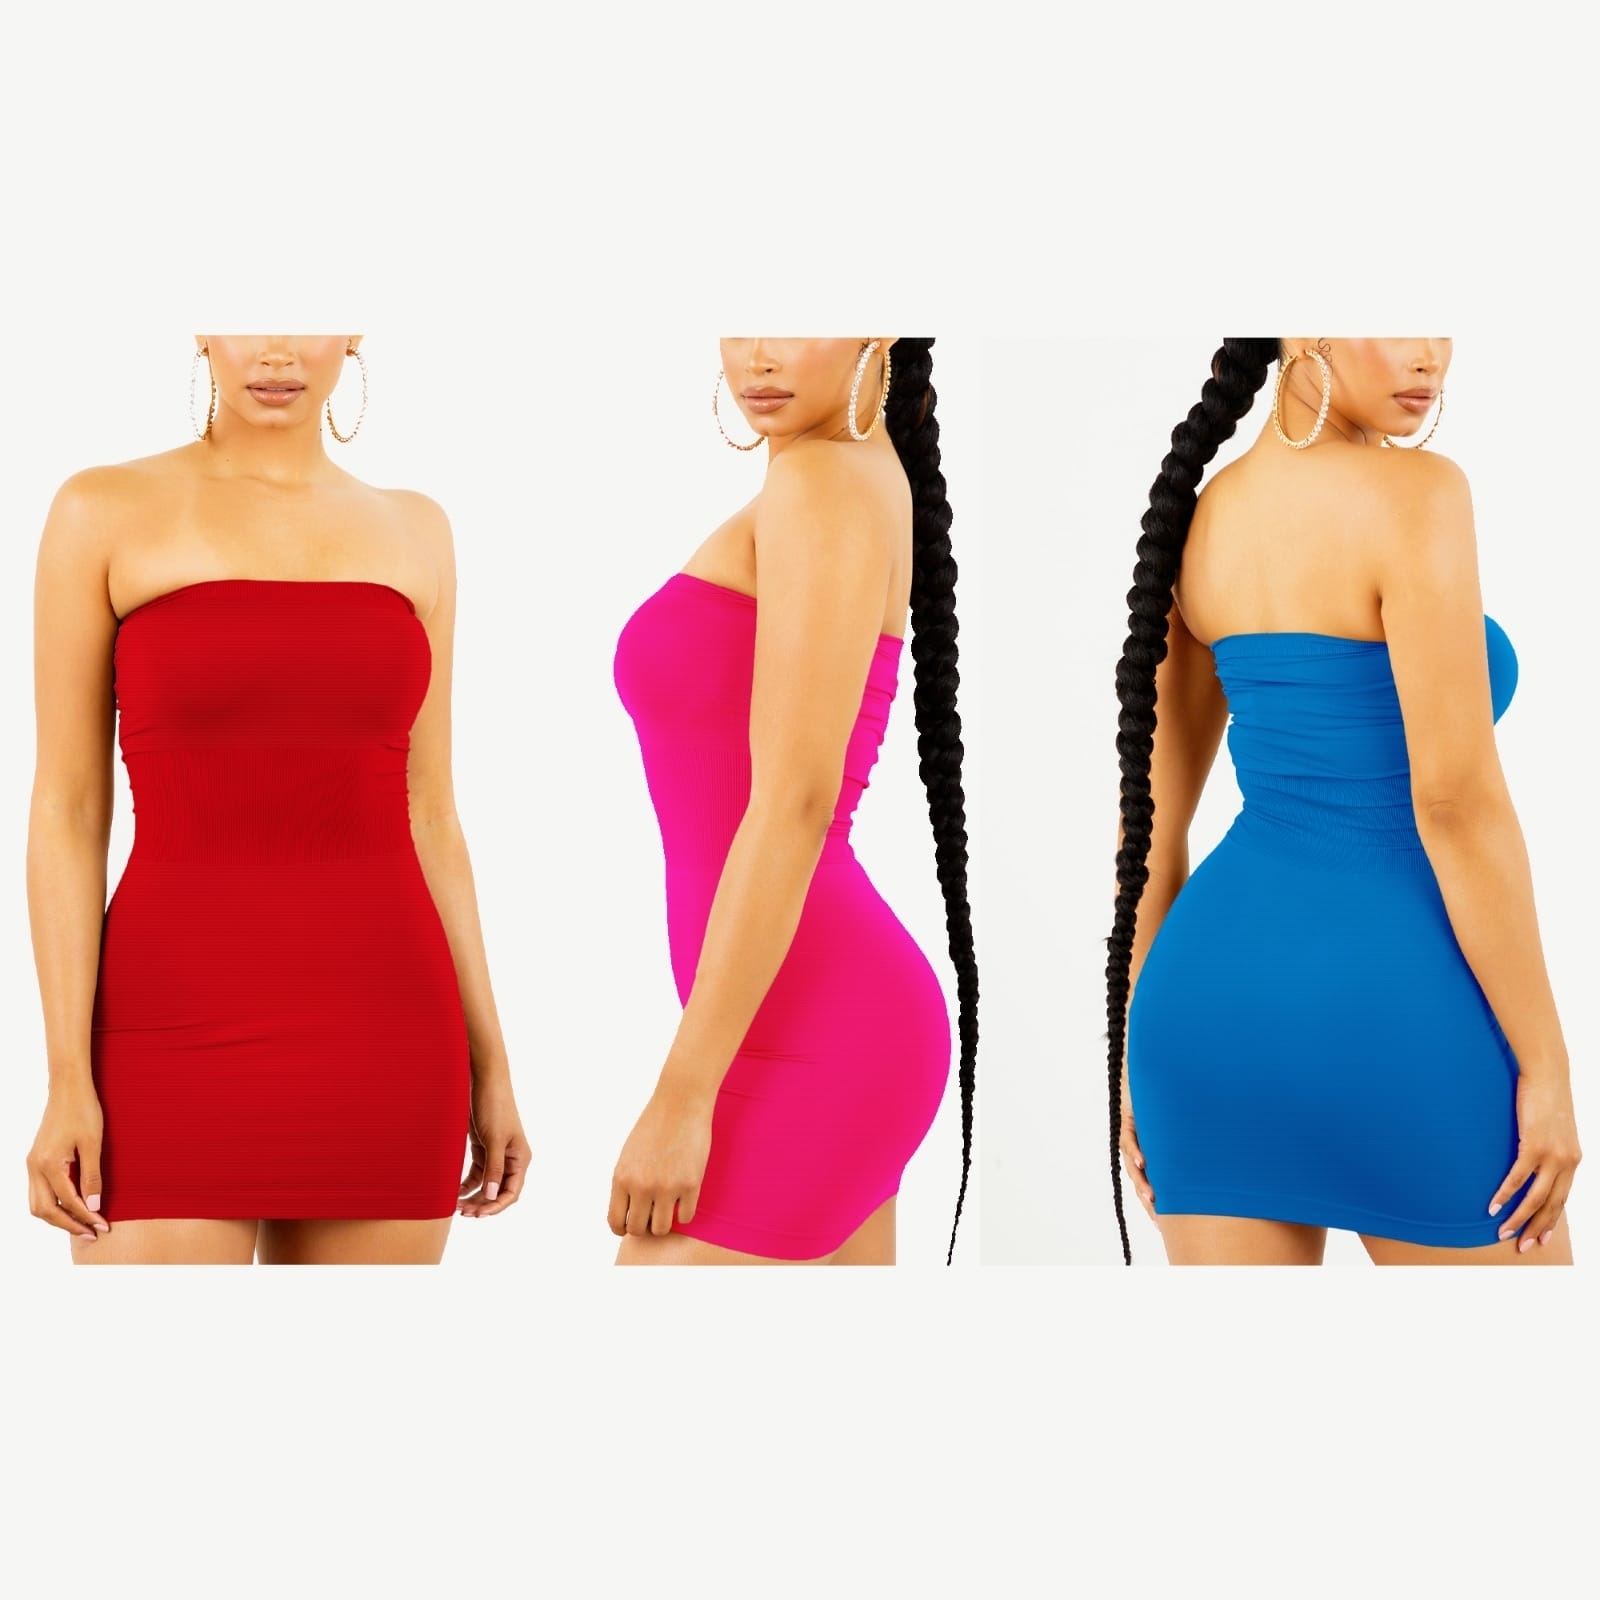 3-Pack Women's Strapless Stretchy Seamless Tight Fit Body Con Mini Tube Top Dress - RED, M